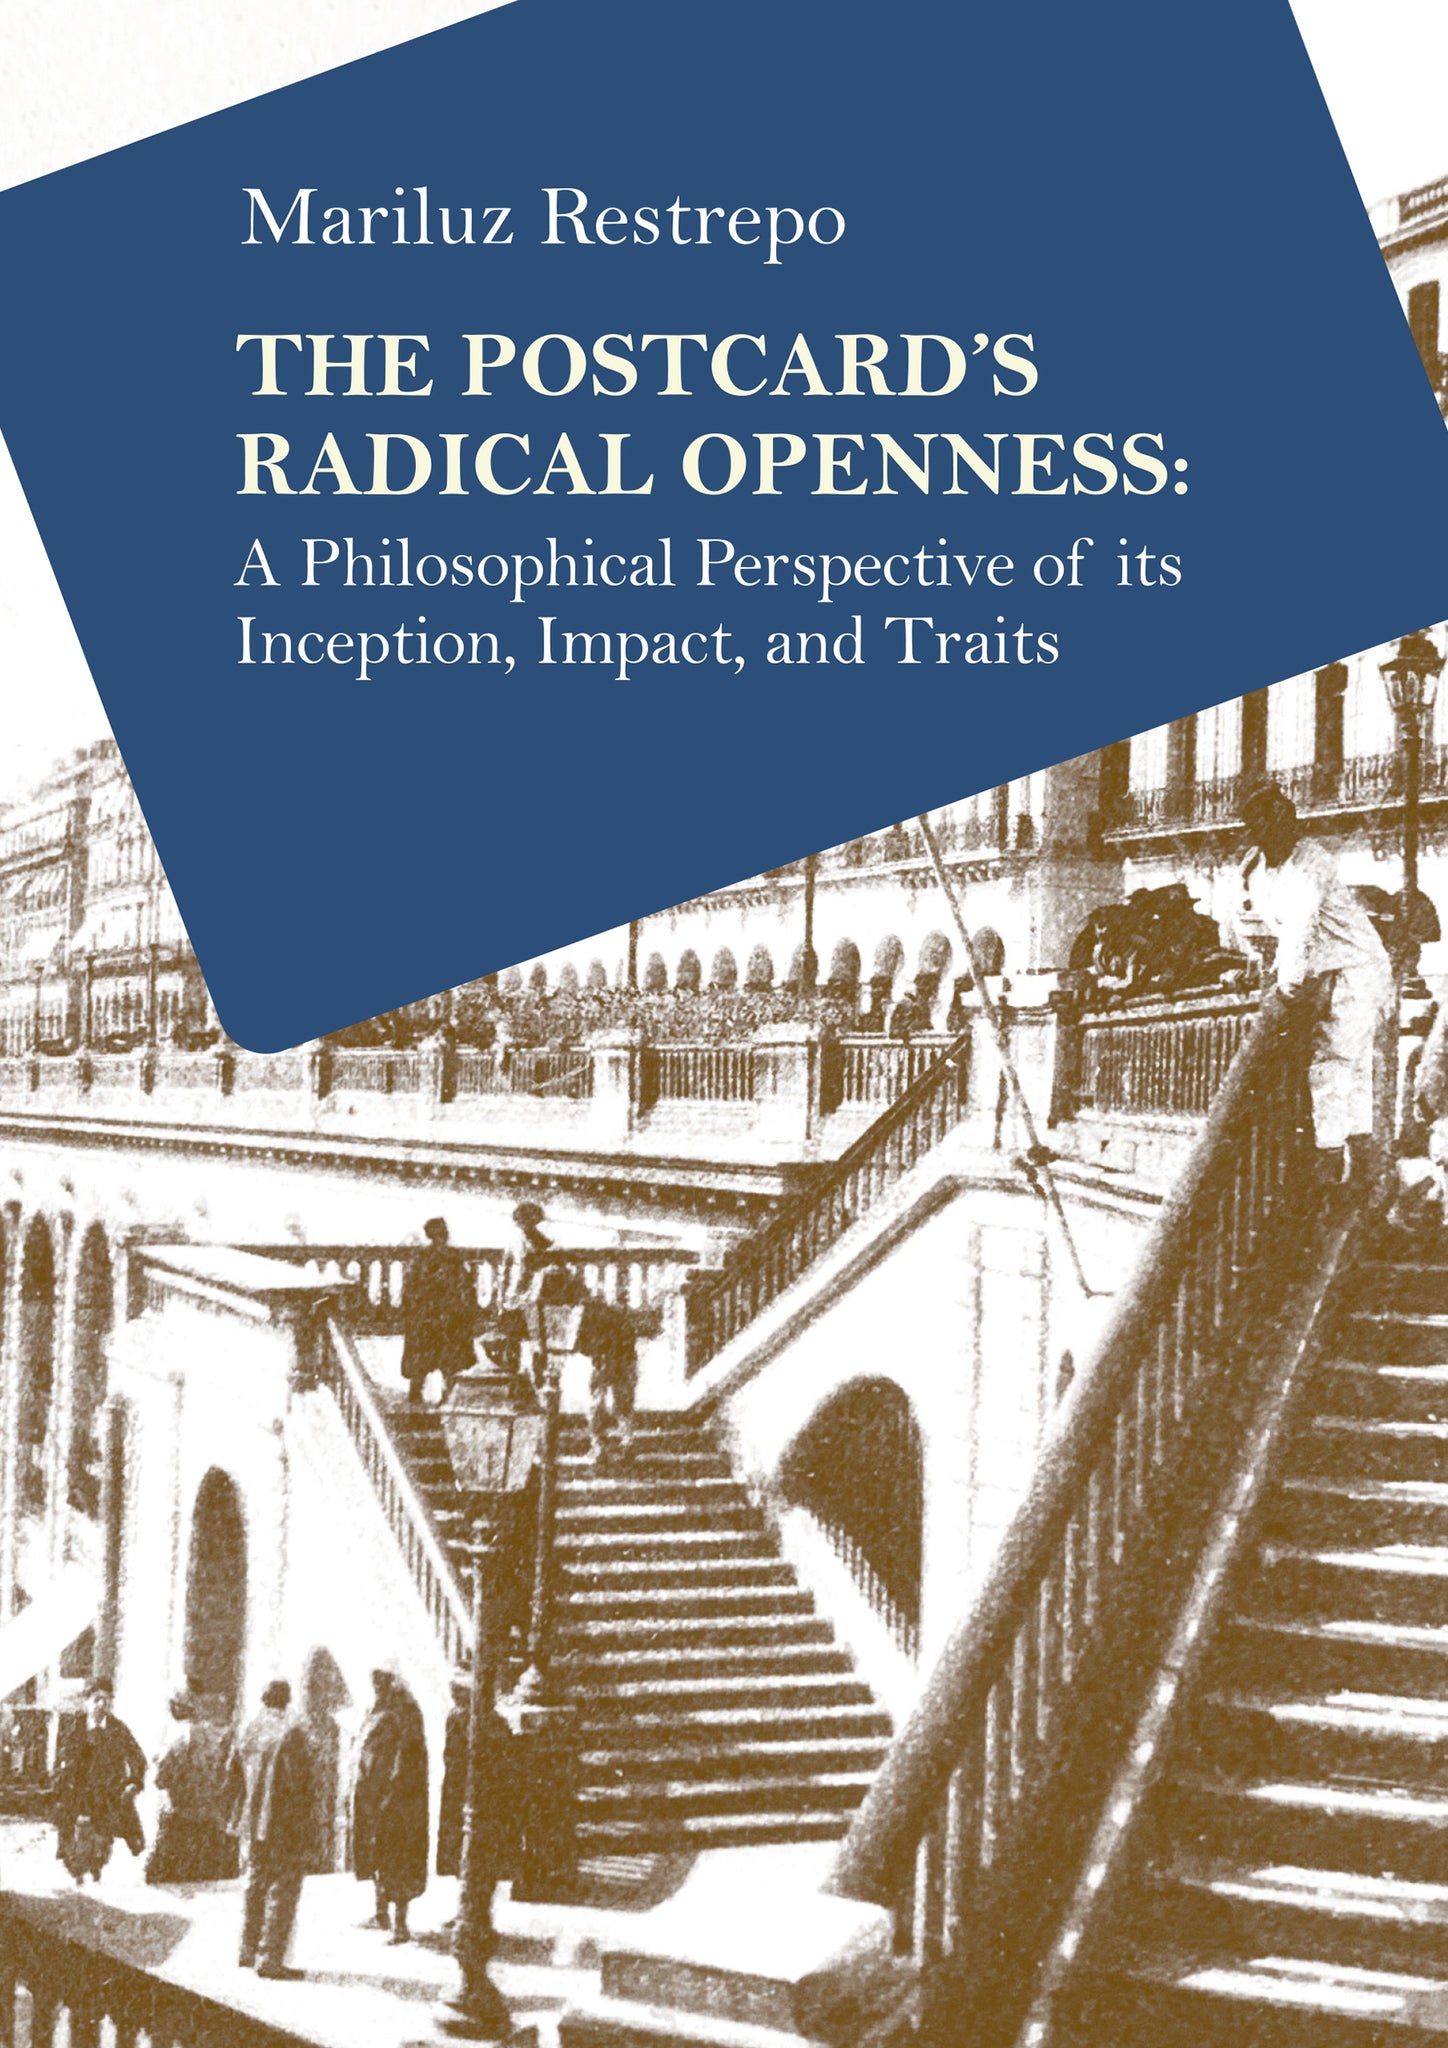 The Postcard’s Radical Openness: A Philosophical Perspective of its Inception, Impact, and Traits